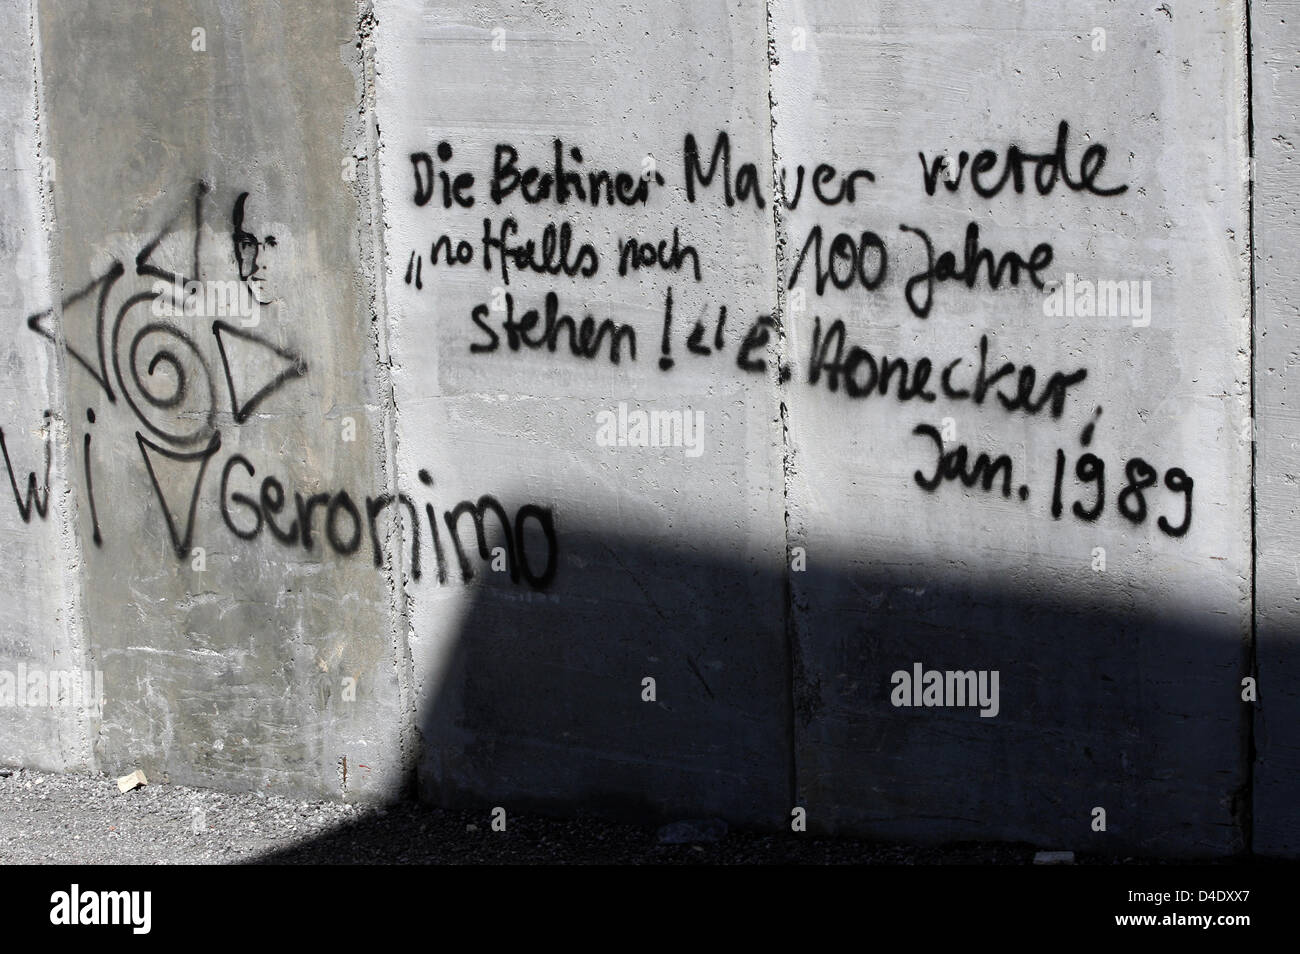 Israel's controversial West Bank wall reads a famous quote of former GDR leader Erich Honecker 'The Berlin Wall will be standing even 100 years if the reasons for it are not removed' dating January 1989, ten months prior to the fall of the Berlin Wall, captured in Bethlehem, Palestinian Autonomous Territories, 28 February 2008. Photo: Rainer Jensen Stock Photo